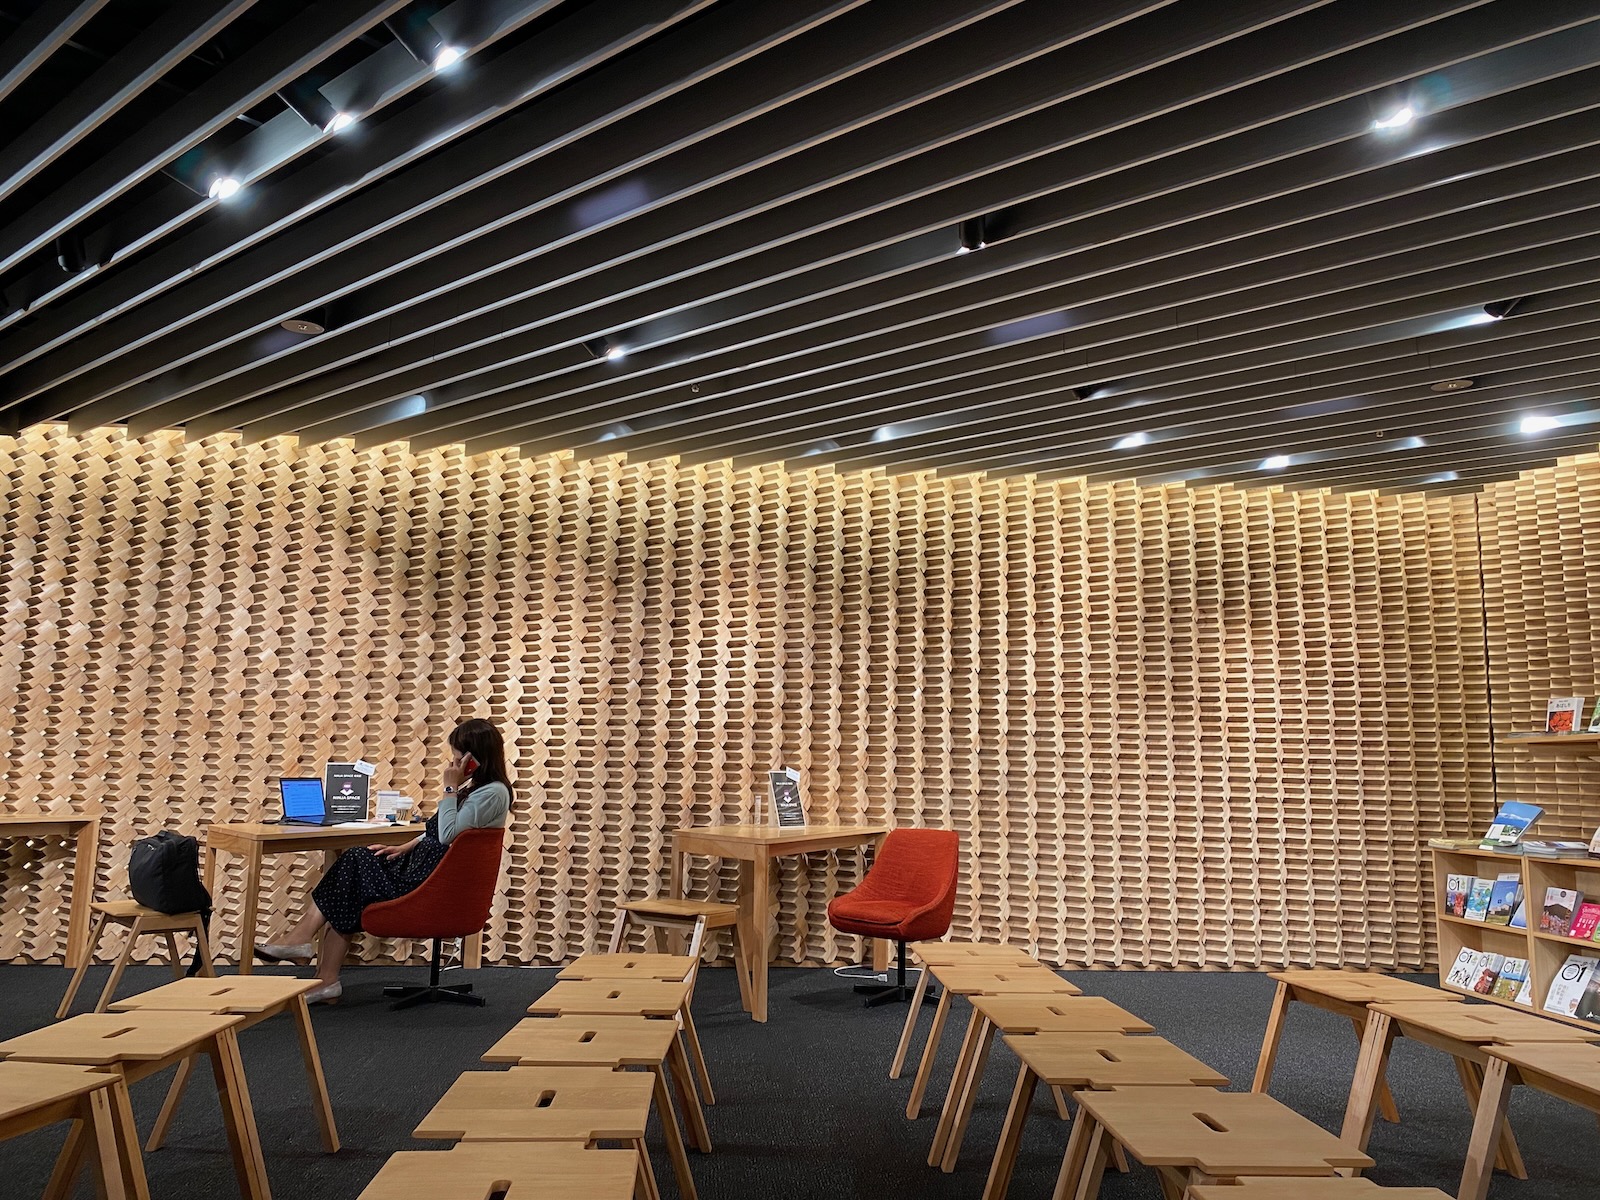 A large room with a patterned wooden wall. Small wooden stools are arranged in rows in the foreground, while in the background a woman seated at a small table speaks on her cellphone.